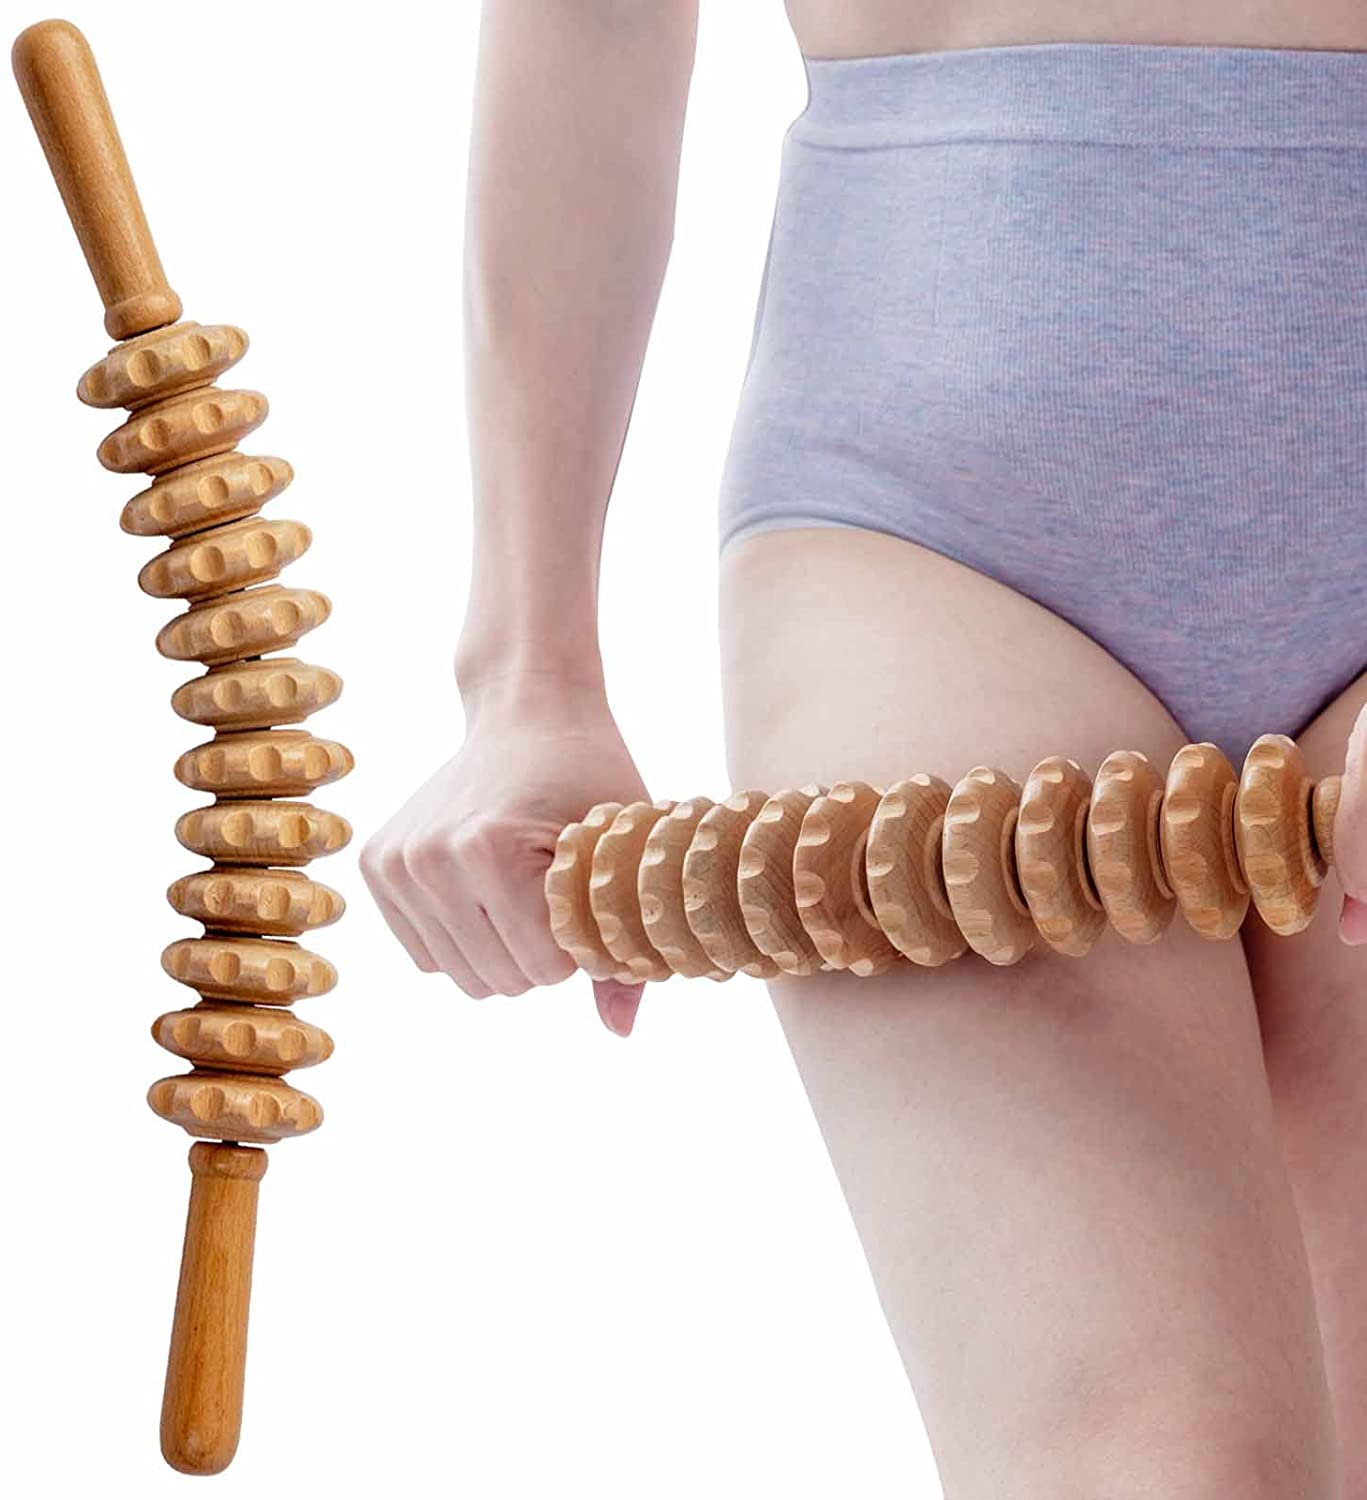 12 Wheel Curved Wood Massage Roller For Body Massage